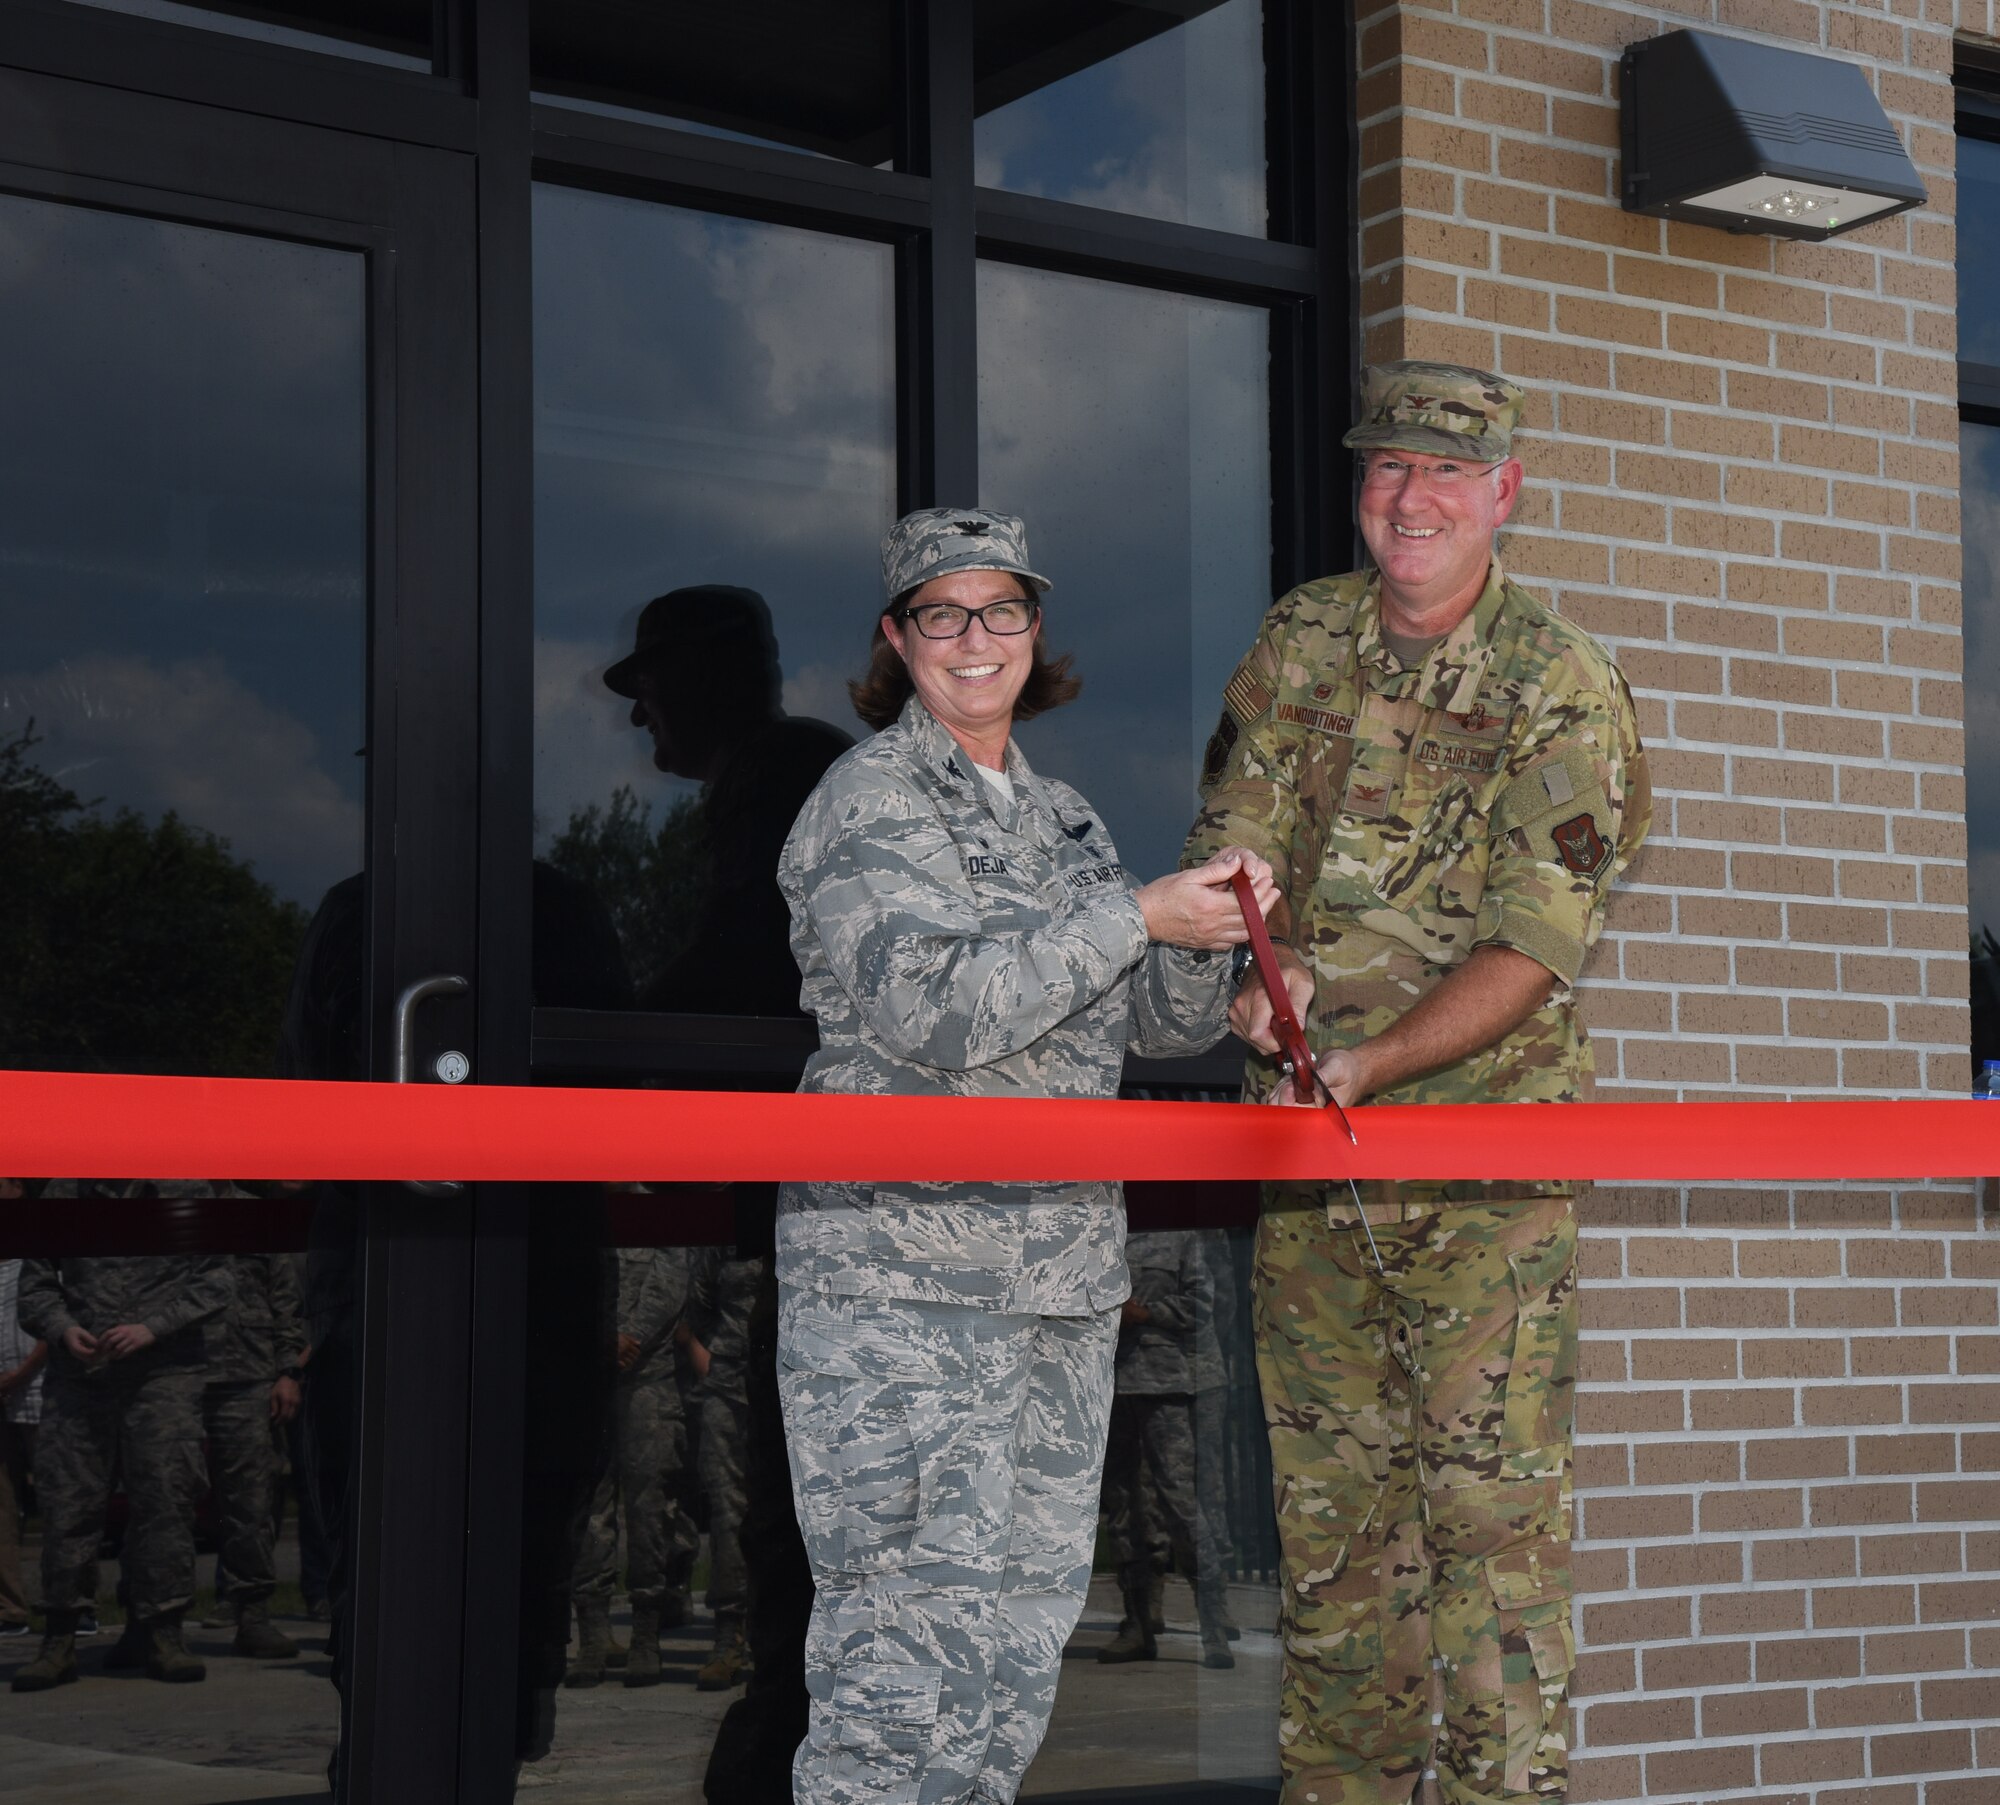 Col. Deborah A. Deja, 36th Aeromedical Evacuation Squadron commander, and Col. Jeffrey Van Dootingh, 403rd Wing commander, pose for a photo before cutting the ribbon in front of 36th AES's new building at Keesler Air Force Base, Miss., September 7, 2019. The 36th AES is responsible for the in-flight care of wounded service-members as they are transported to a medical facility equipped for critical situations (U.S. Air Force photo by Senior Airman Kristen L. Pittman).